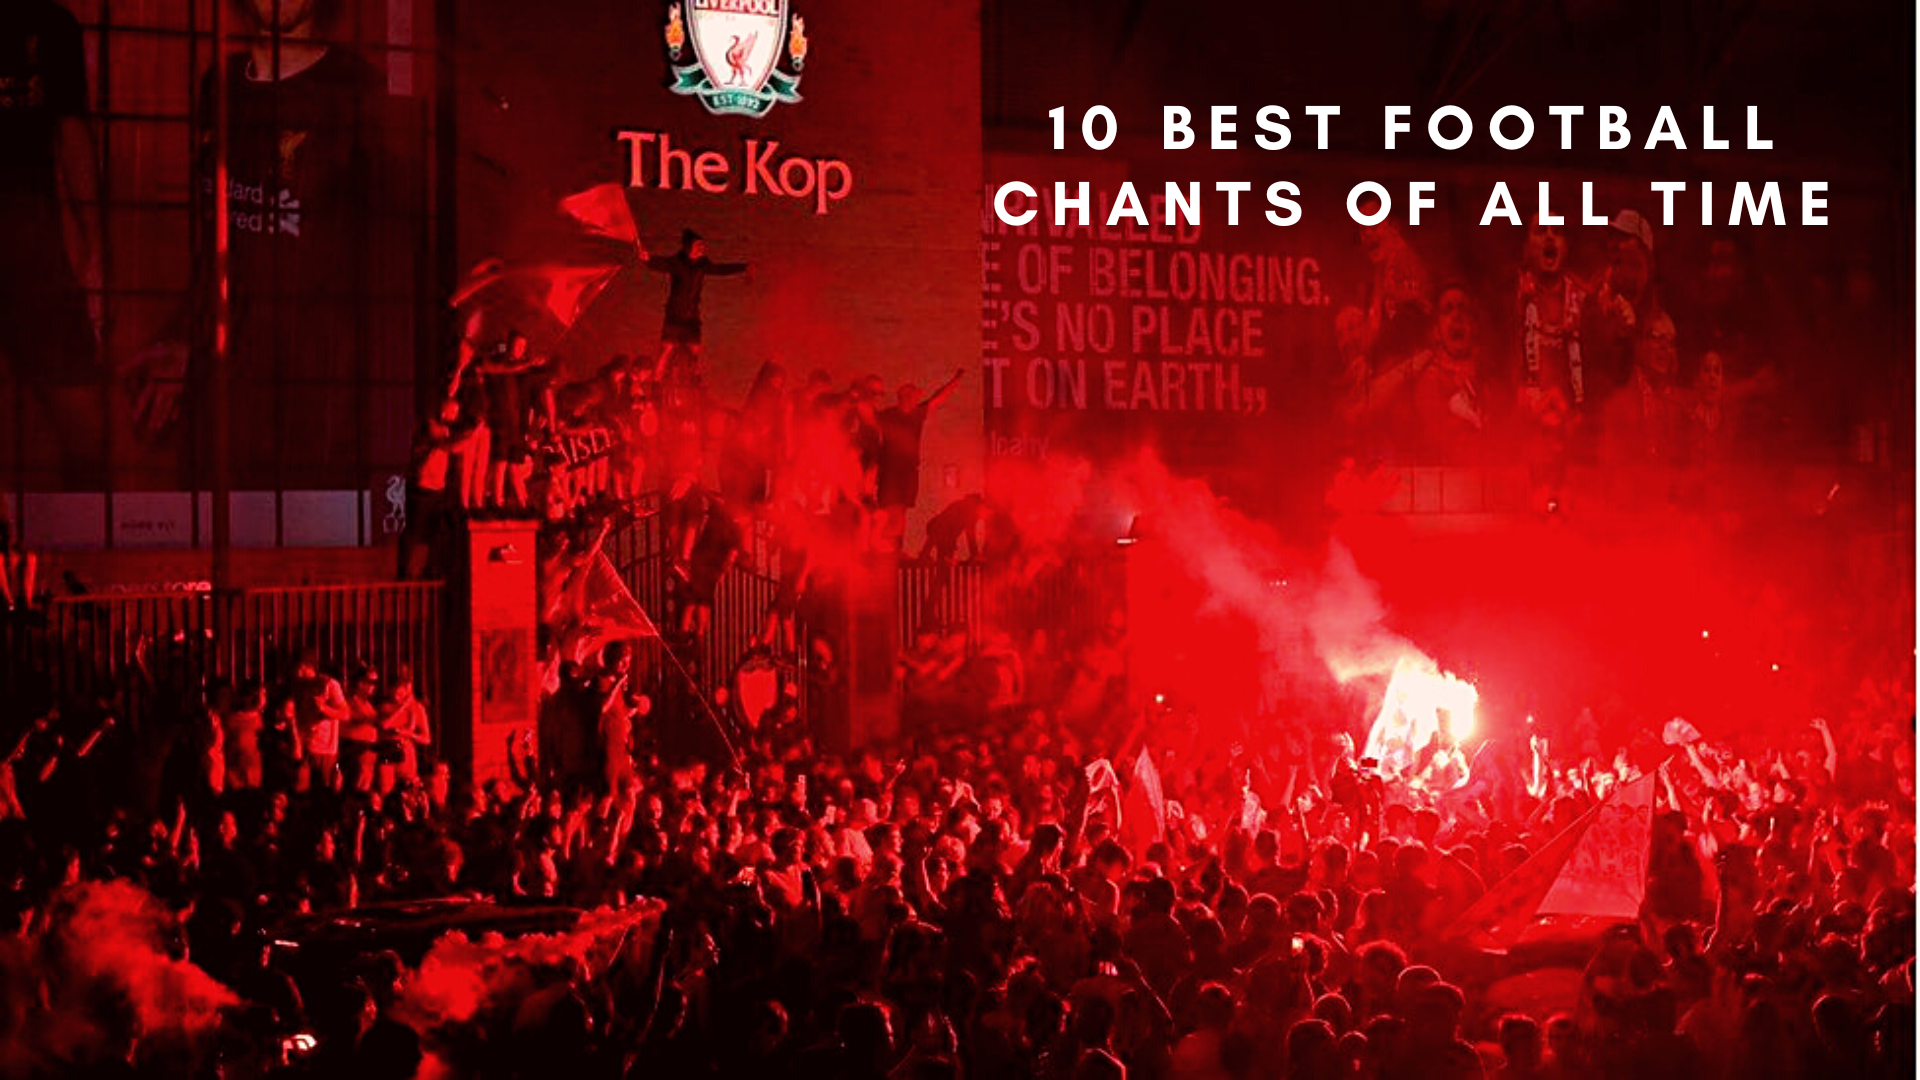 10 Best football chants of all time